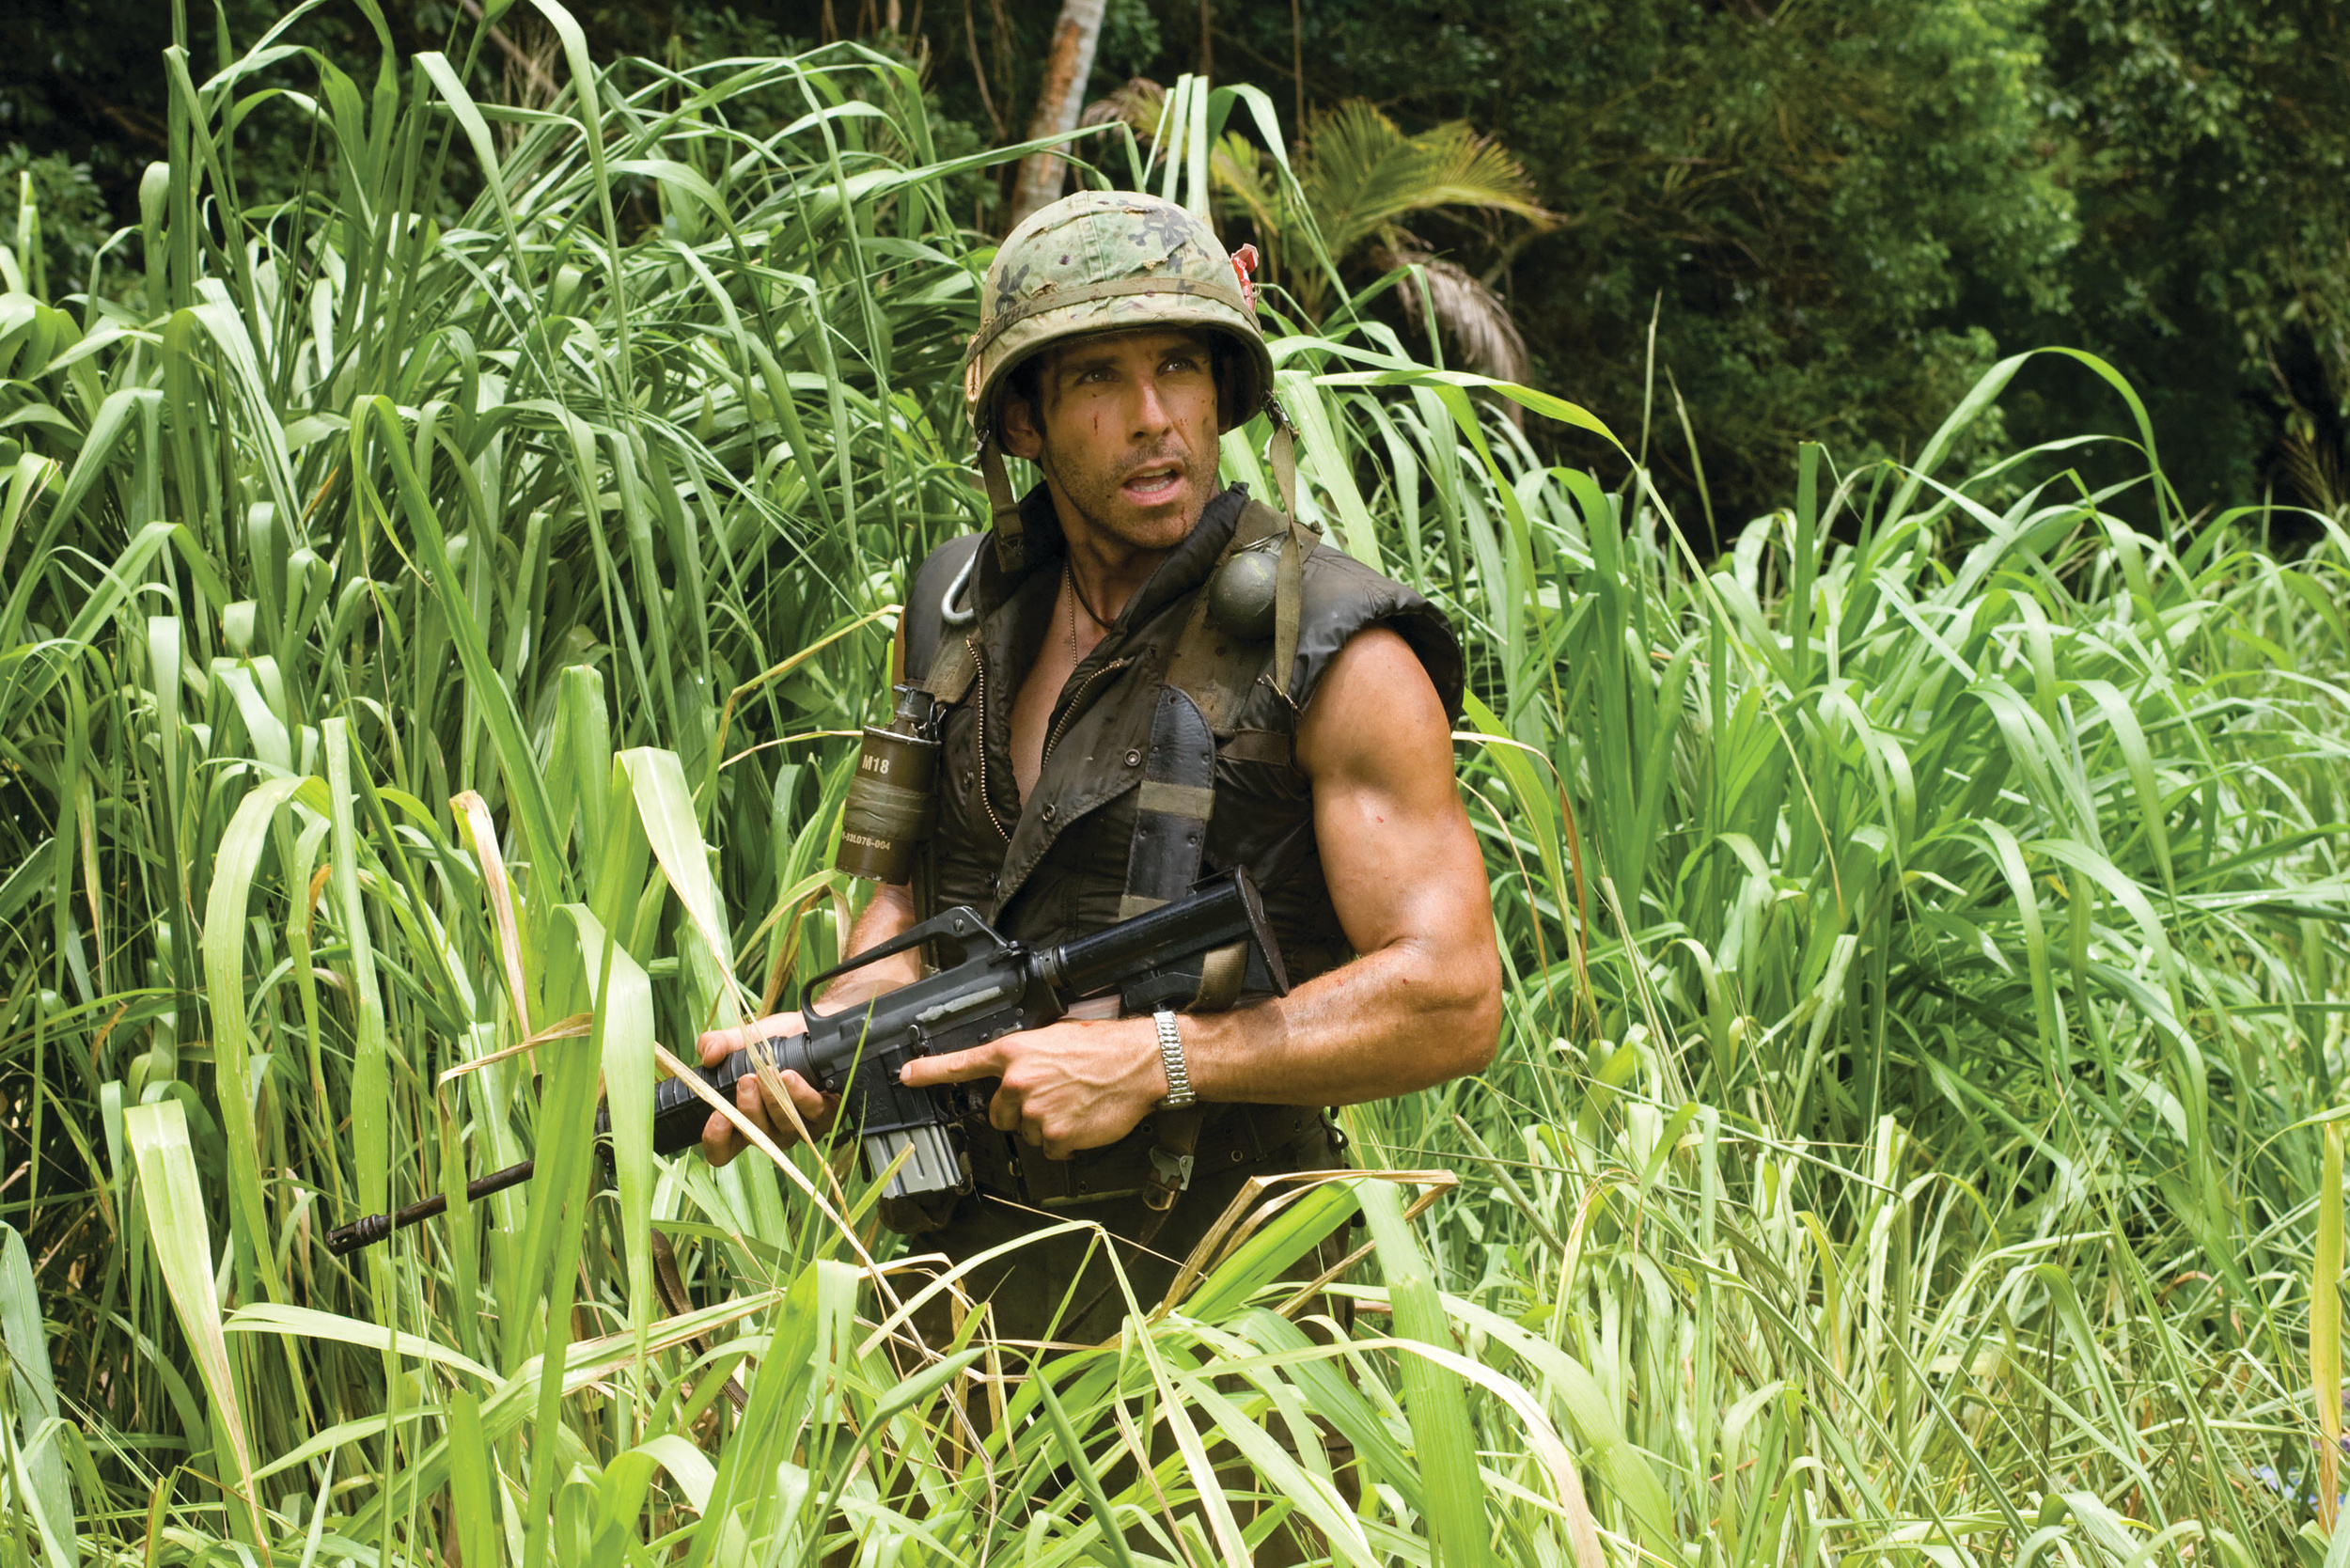 <p><em>Tropic Thunder</em> wouldn’t be released until 2008, but Stiller first got the idea decades earlier. The actor-turned-director got the first germ for the concept while acting in the war movie <em>Empire of the Sun</em> in 1987.</p><p>You may also like: <a href='https://www.yardbarker.com/entertainment/articles/15_prince_songs_made_famous_by_other_artists_030524/s1__23741893'>15 Prince songs made famous by other artists</a></p>